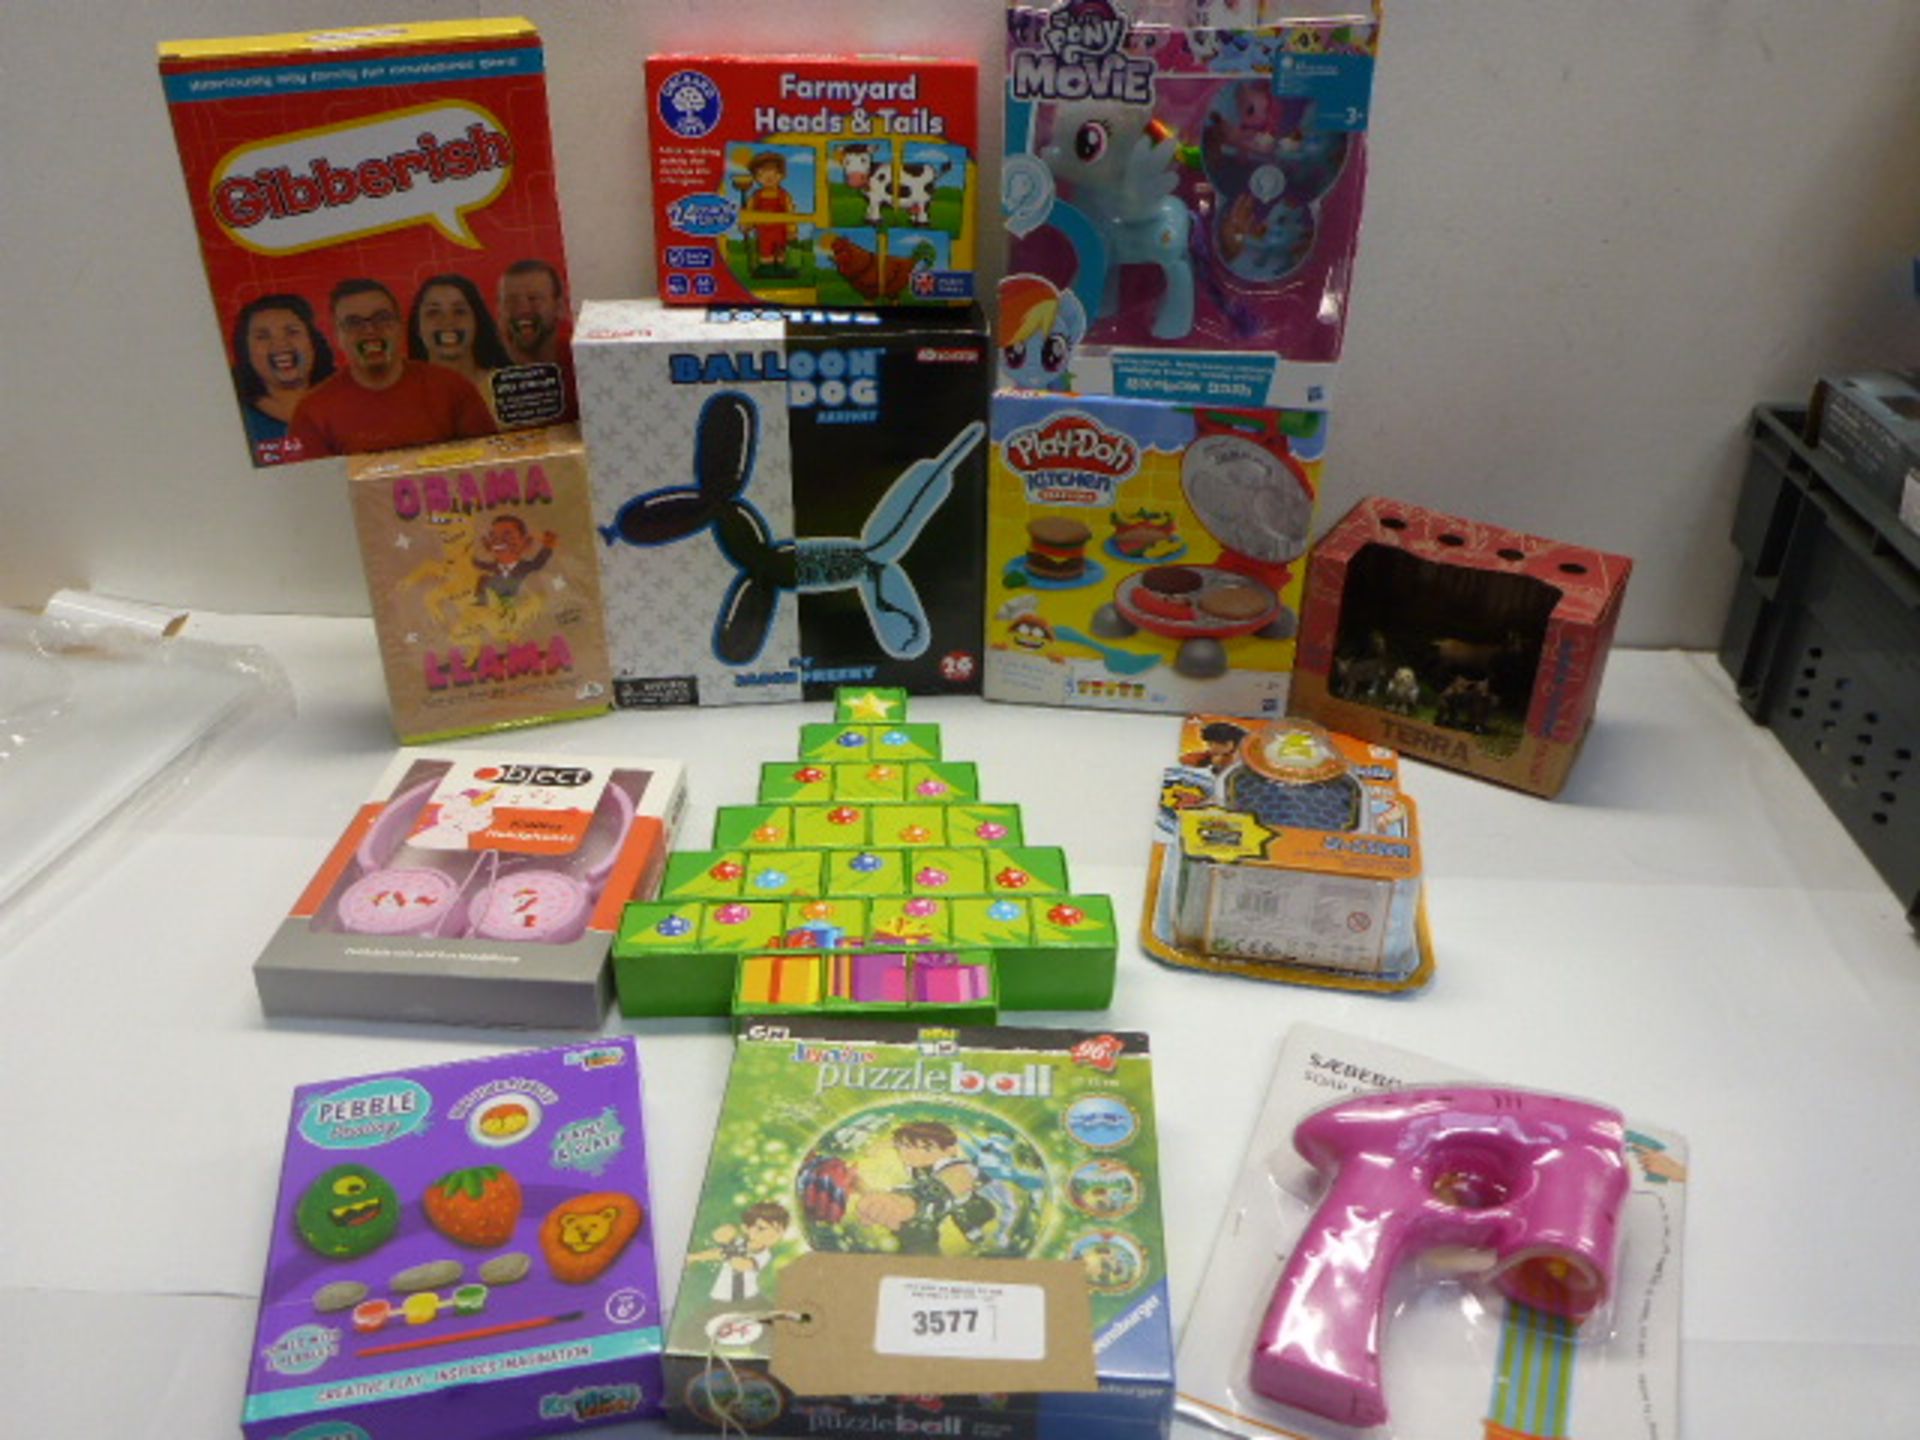 13 boxed games including Play-doh, Balloon Dog, My Little Pony, Puzzle ball, Kids headphones etc